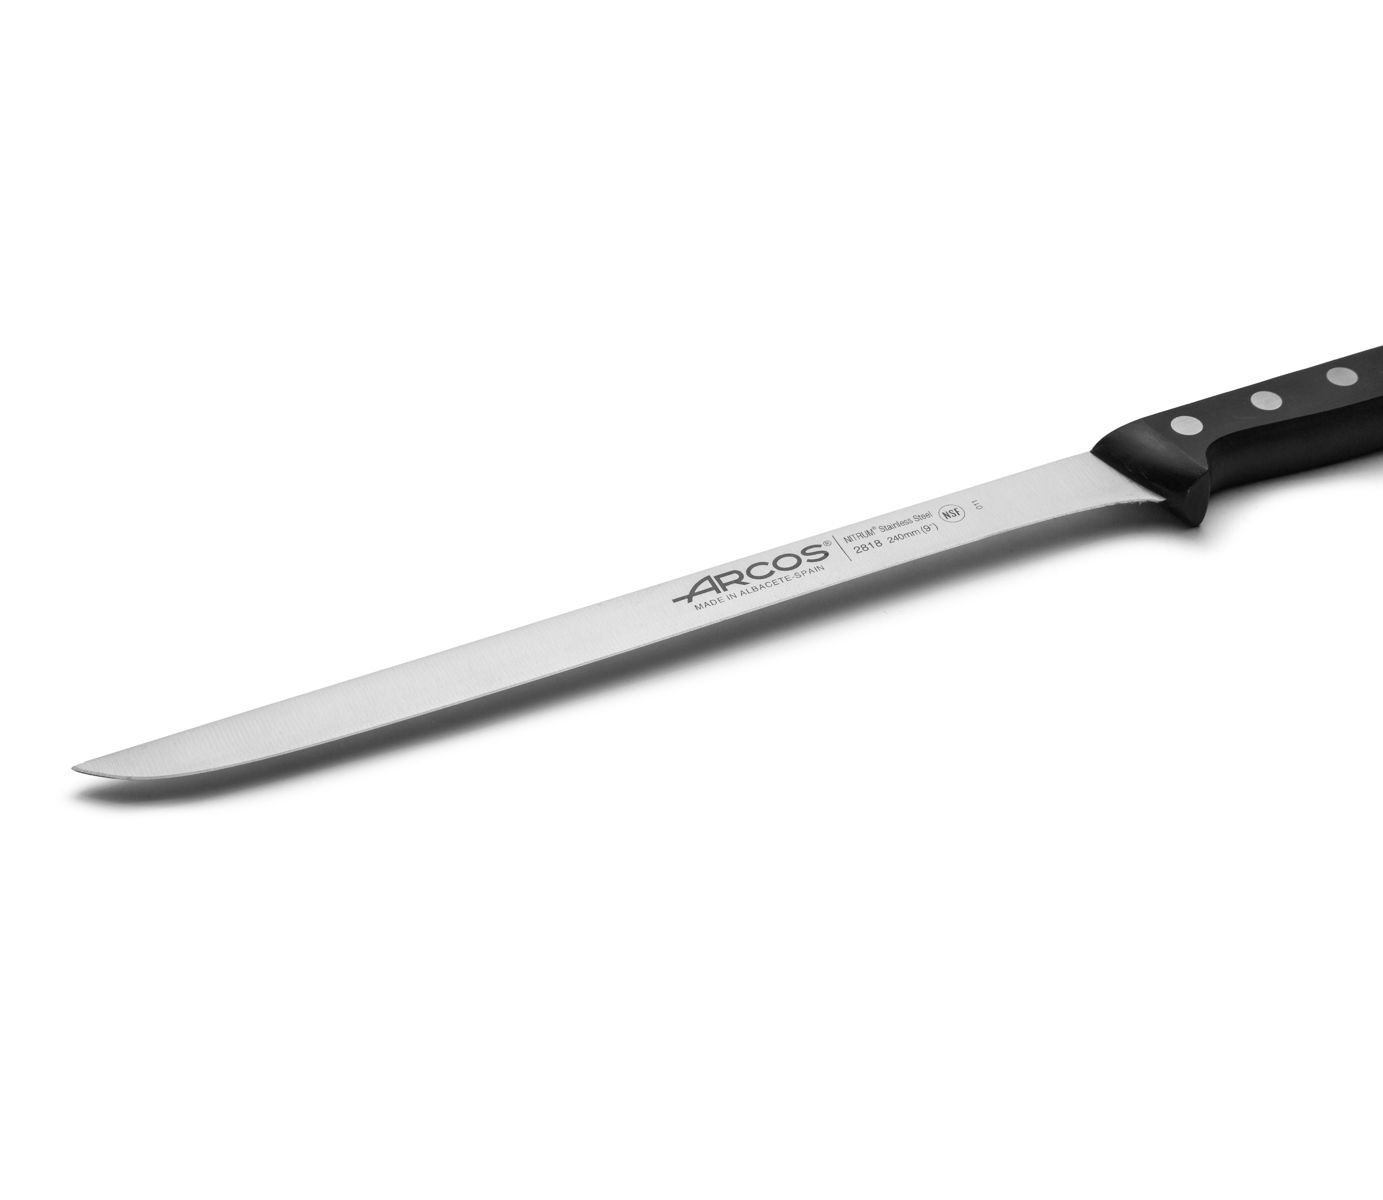 Arcos Universal Series 9 Inch Slicing Knife - 281804